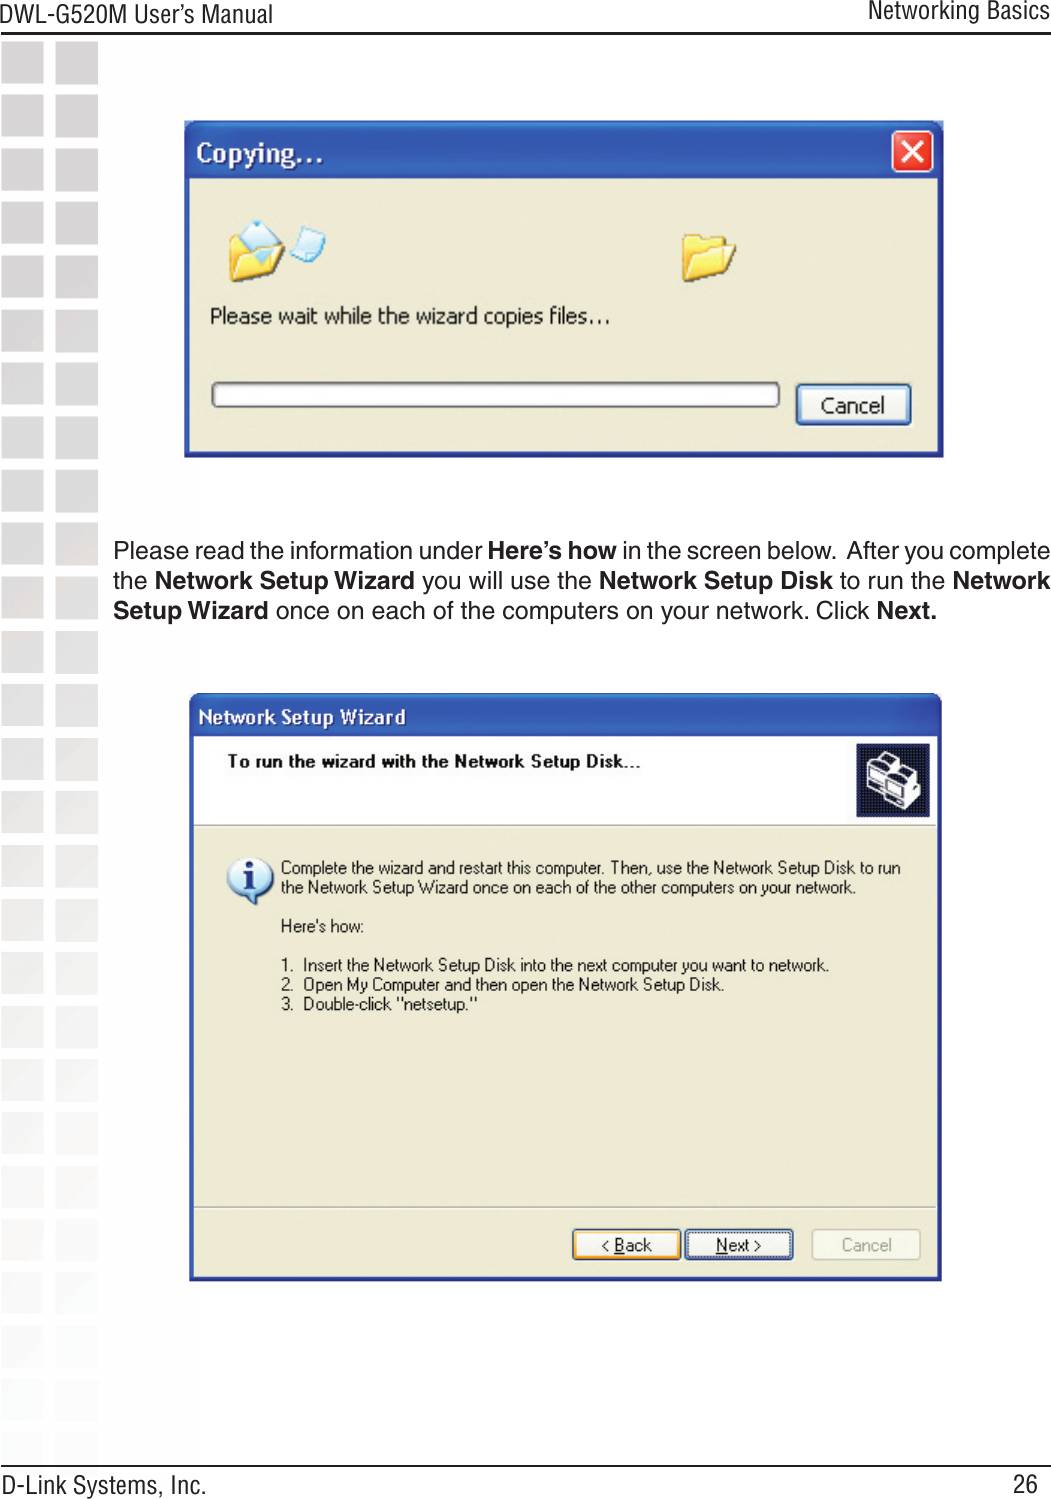 26DWL-G520M User’s Manual D-Link Systems, Inc.Networking BasicsPlease read the information under Here’s how in the screen below.  After you complete the Network Setup Wizard you will use the Network Setup Disk to run the Network Setup Wizard once on each of the computers on your network. Click Next. 